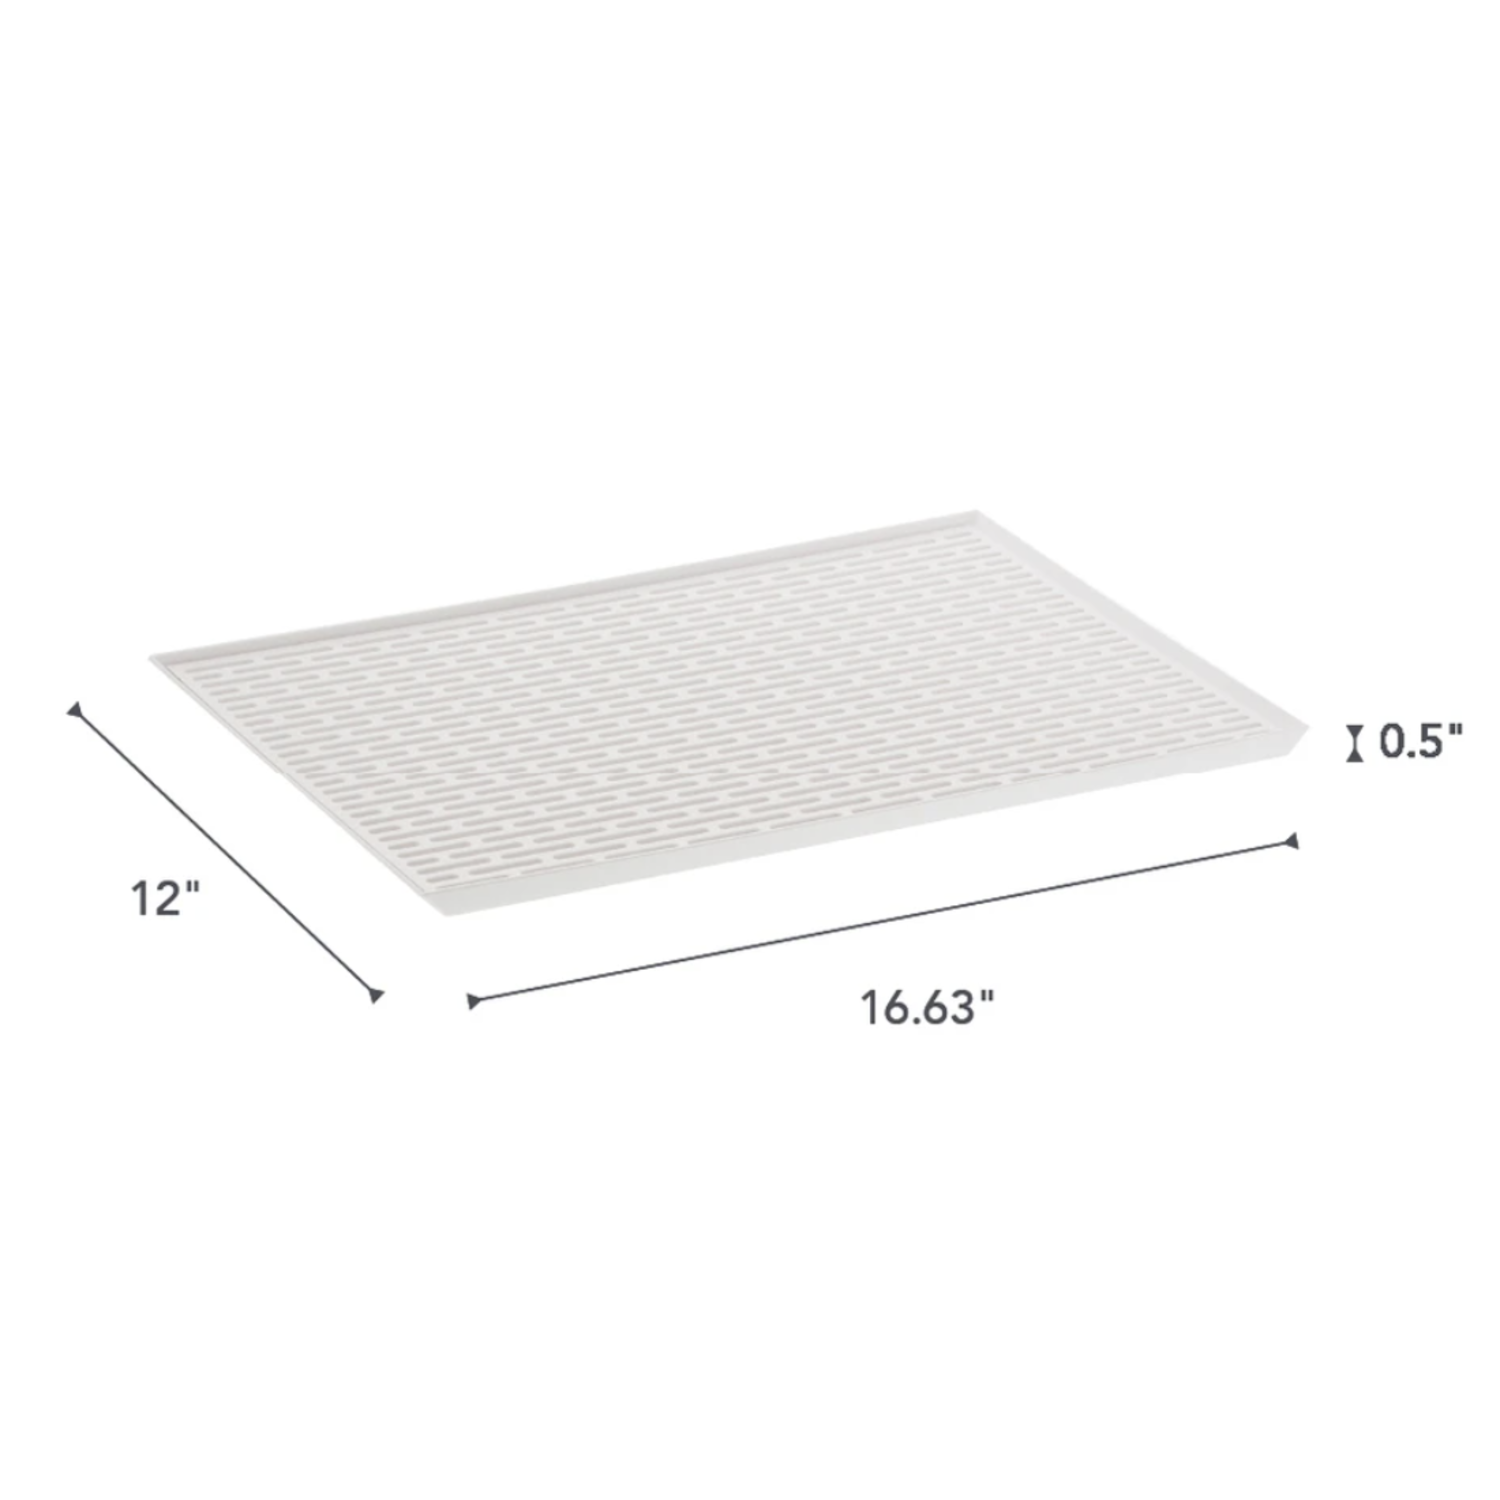 Large Silicone Drying Mat